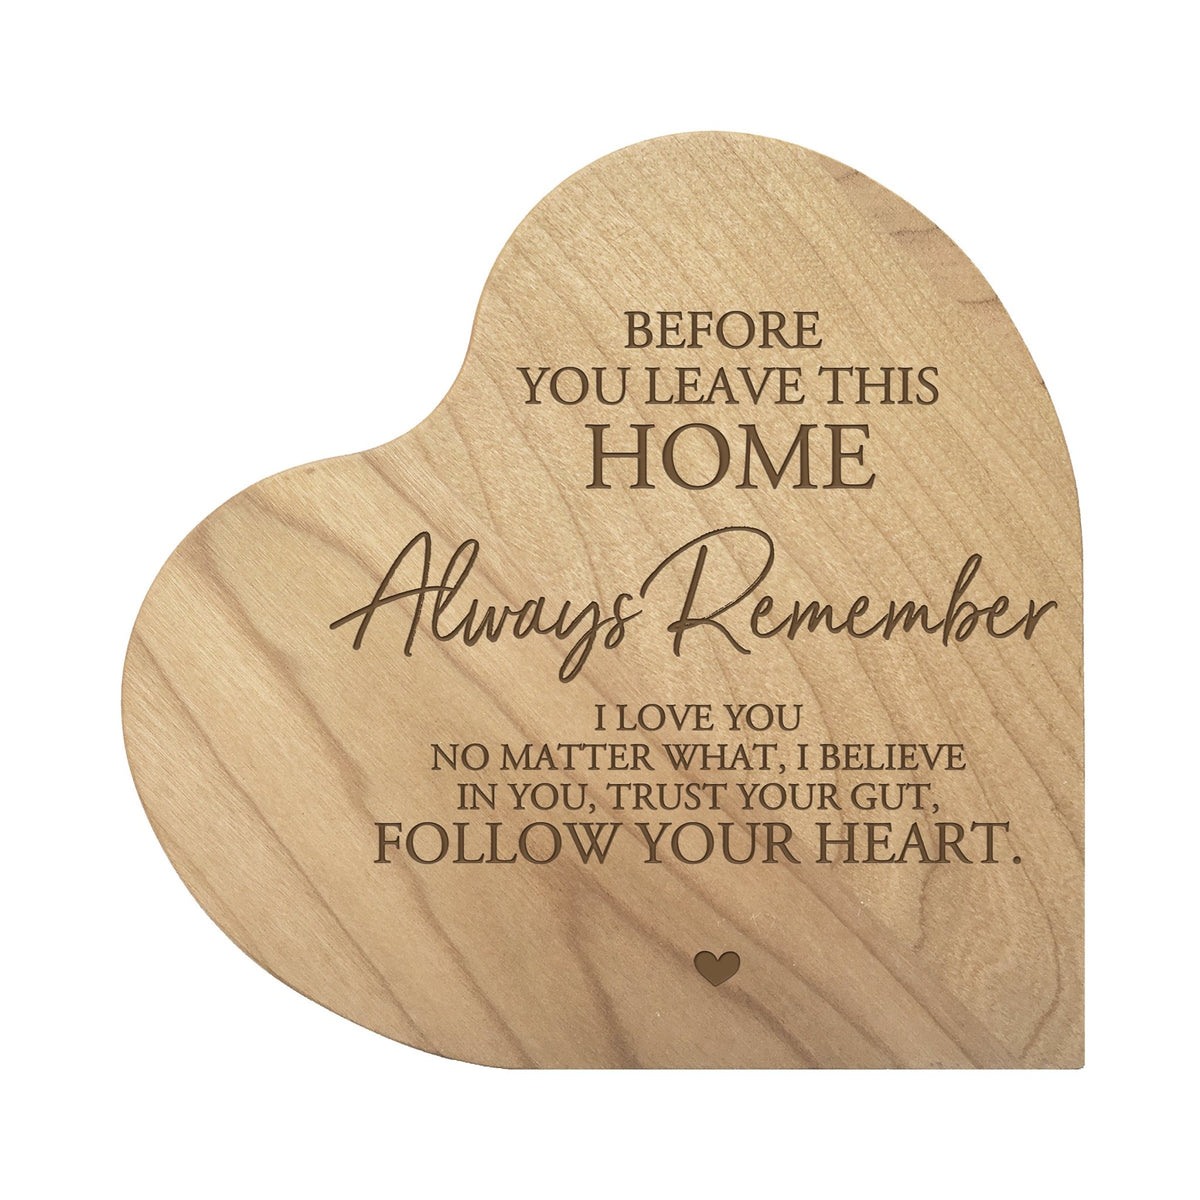 Engraved Wooden Inspirational Heart Block 5” x 5.25” x 0.75” - Before You Leave This - LifeSong Milestones